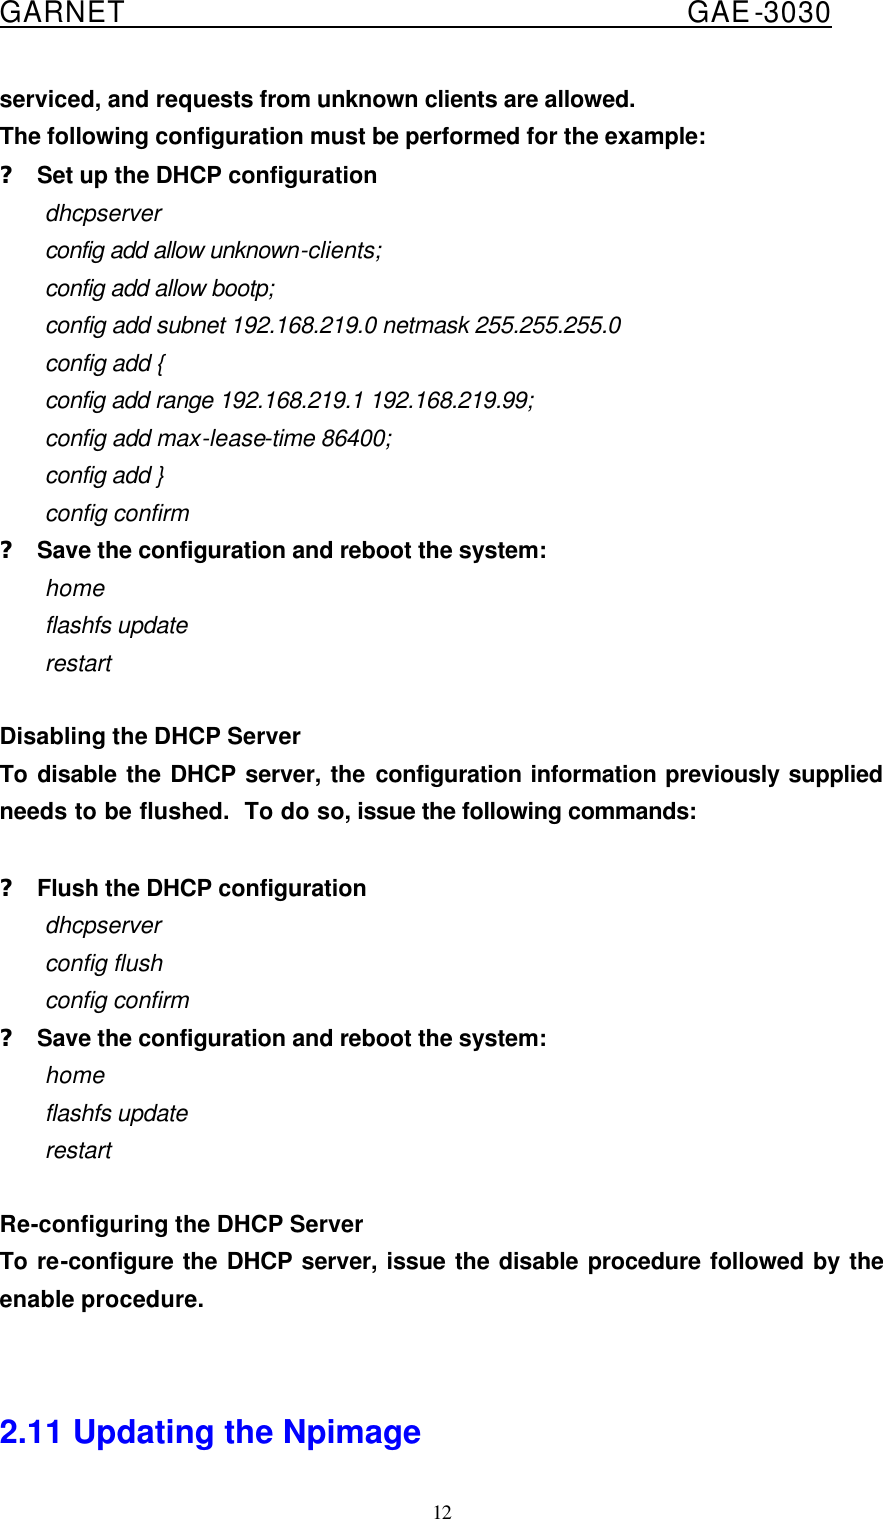  GARNET                                        GAE-3030 12 serviced, and requests from unknown clients are allowed. The following configuration must be performed for the example: ? Set up the DHCP configuration dhcpserver config add allow unknown-clients; config add allow bootp; config add subnet 192.168.219.0 netmask 255.255.255.0 config add { config add range 192.168.219.1 192.168.219.99; config add max-lease-time 86400; config add } config confirm ? Save the configuration and reboot the system: home flashfs update restart  Disabling the DHCP Server To disable the DHCP server, the configuration information previously supplied needs to be flushed.  To do so, issue the following commands:  ? Flush the DHCP configuration dhcpserver config flush config confirm ? Save the configuration and reboot the system: home flashfs update restart  Re-configuring the DHCP Server To re-configure the DHCP server, issue the disable procedure followed by the enable procedure.   2.11 Updating the Npimage 